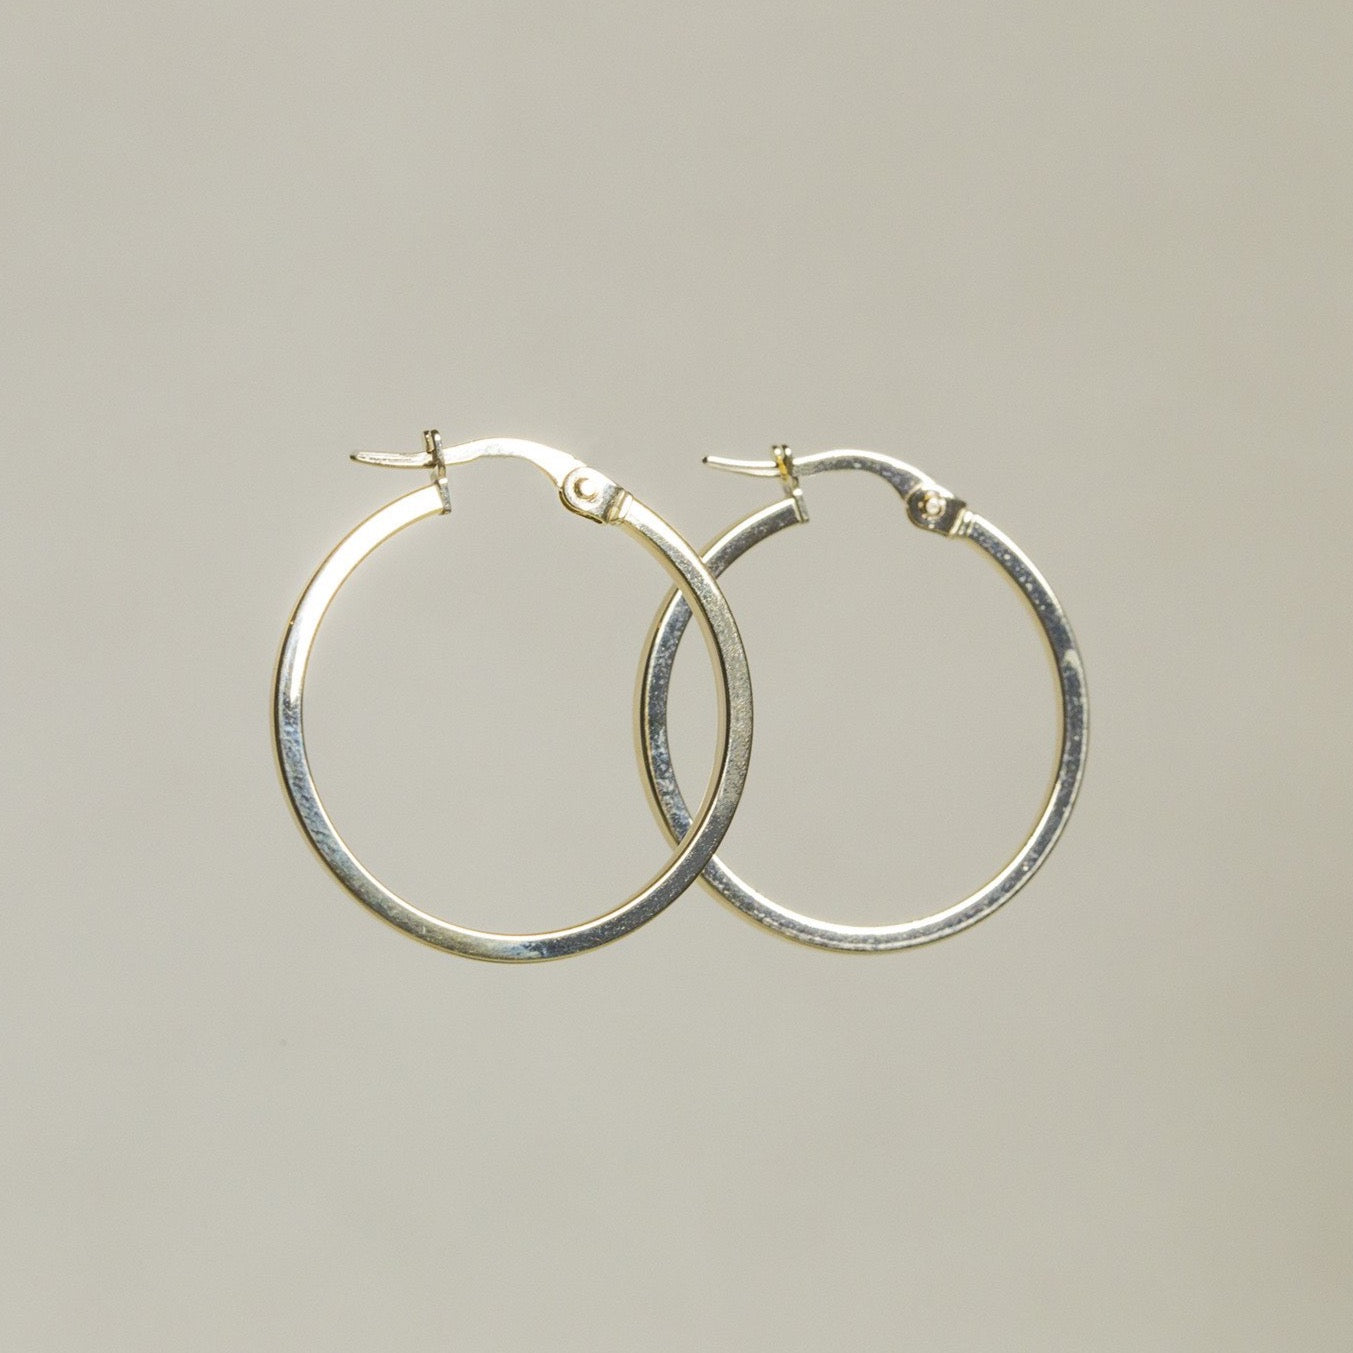 adorable, modern looking large everyday gold hoops